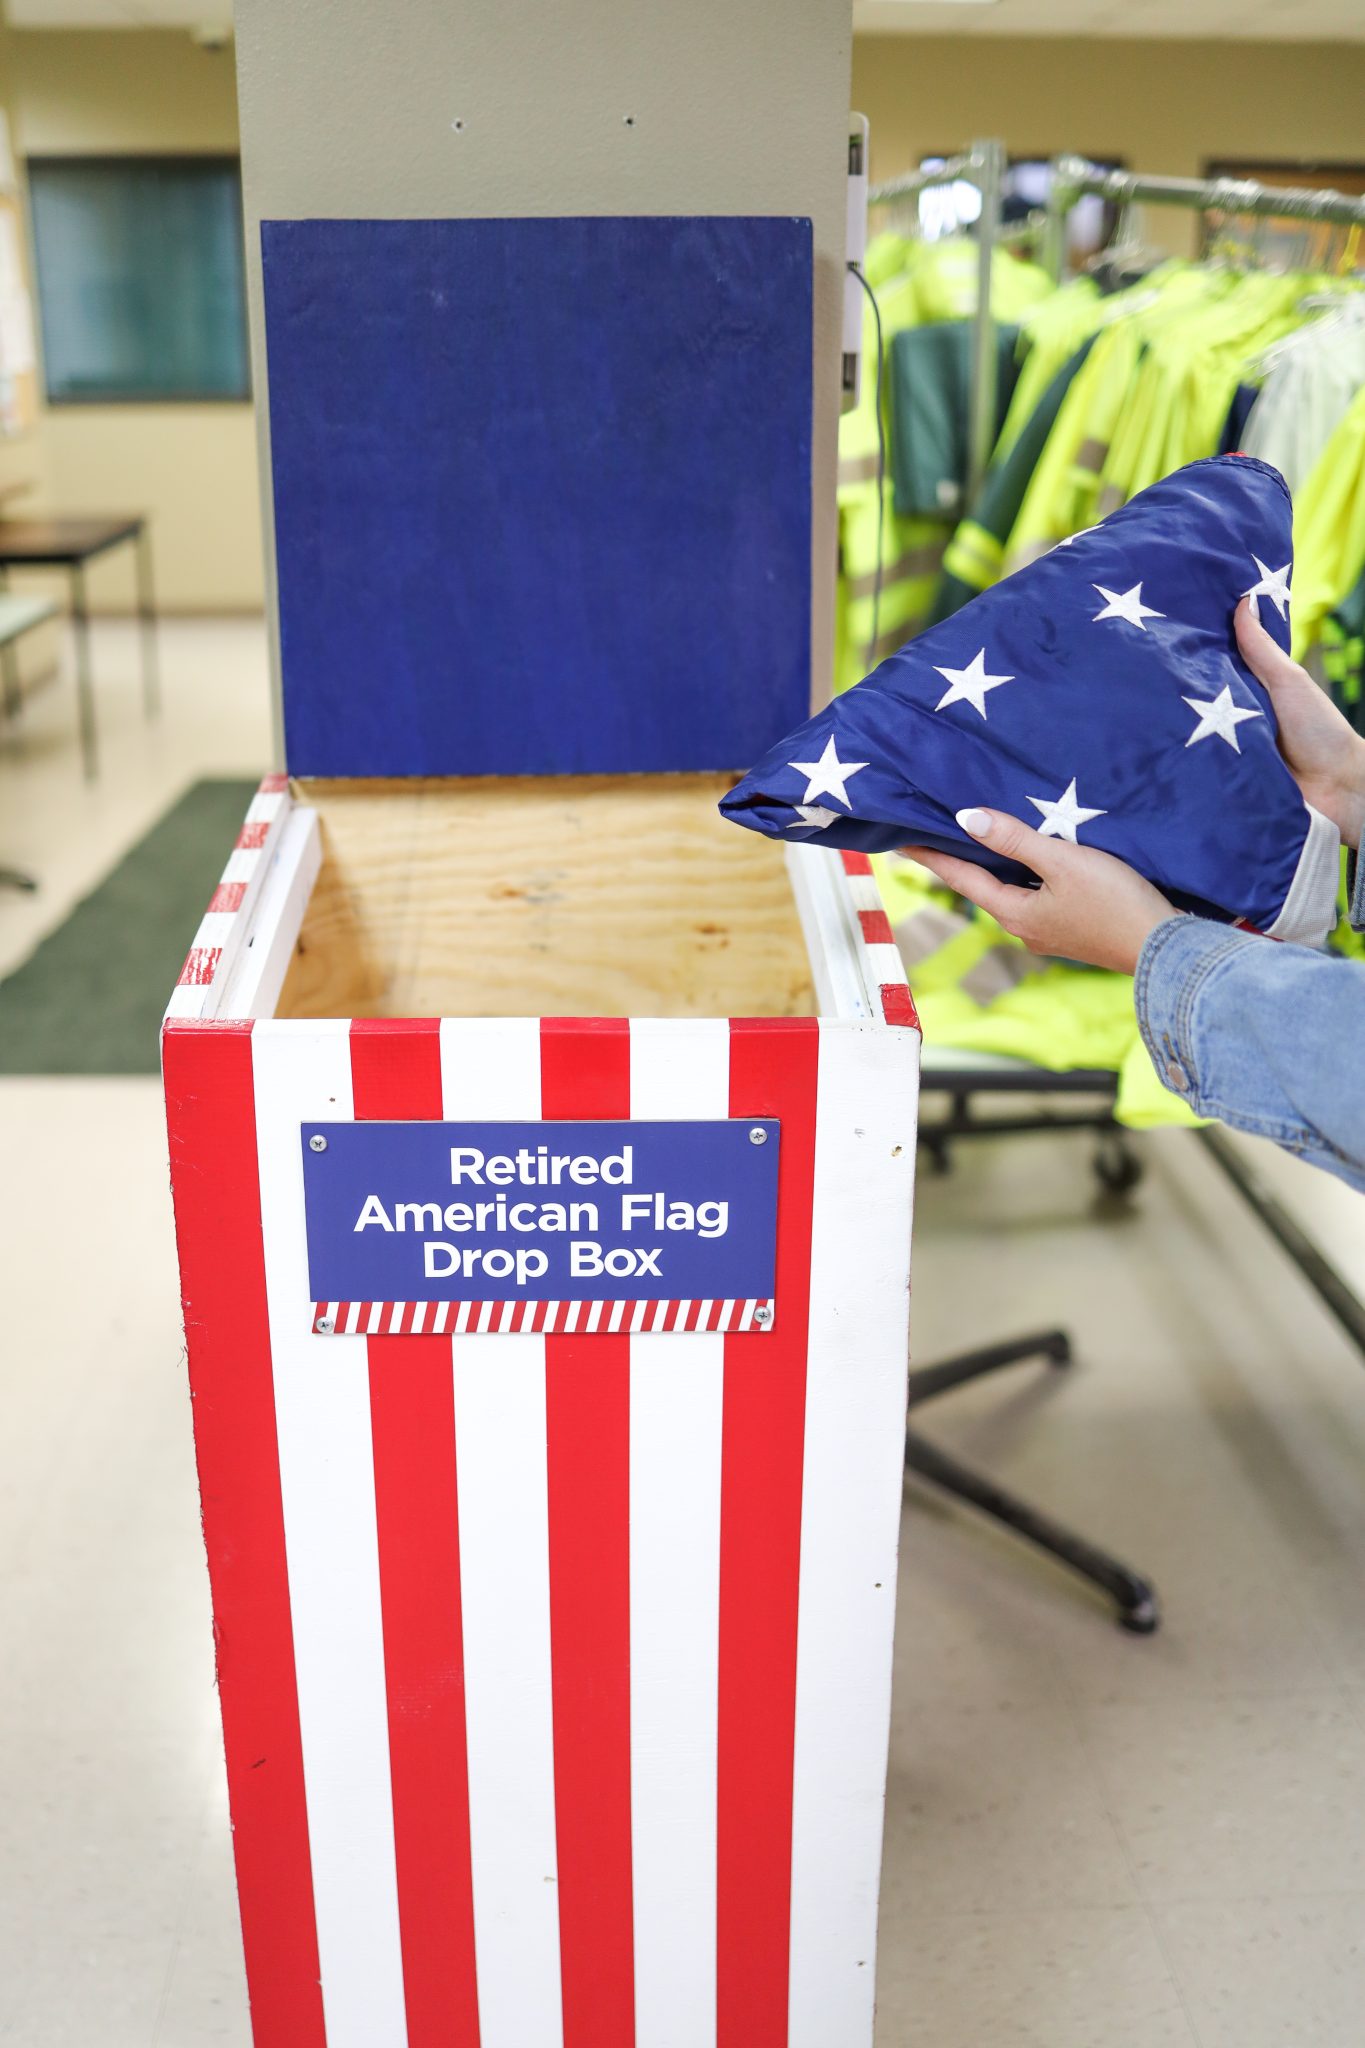 A red-white-and-blue box with the label, "Retired American Flag Drop Box" on it. A person is putting a flag in the box.